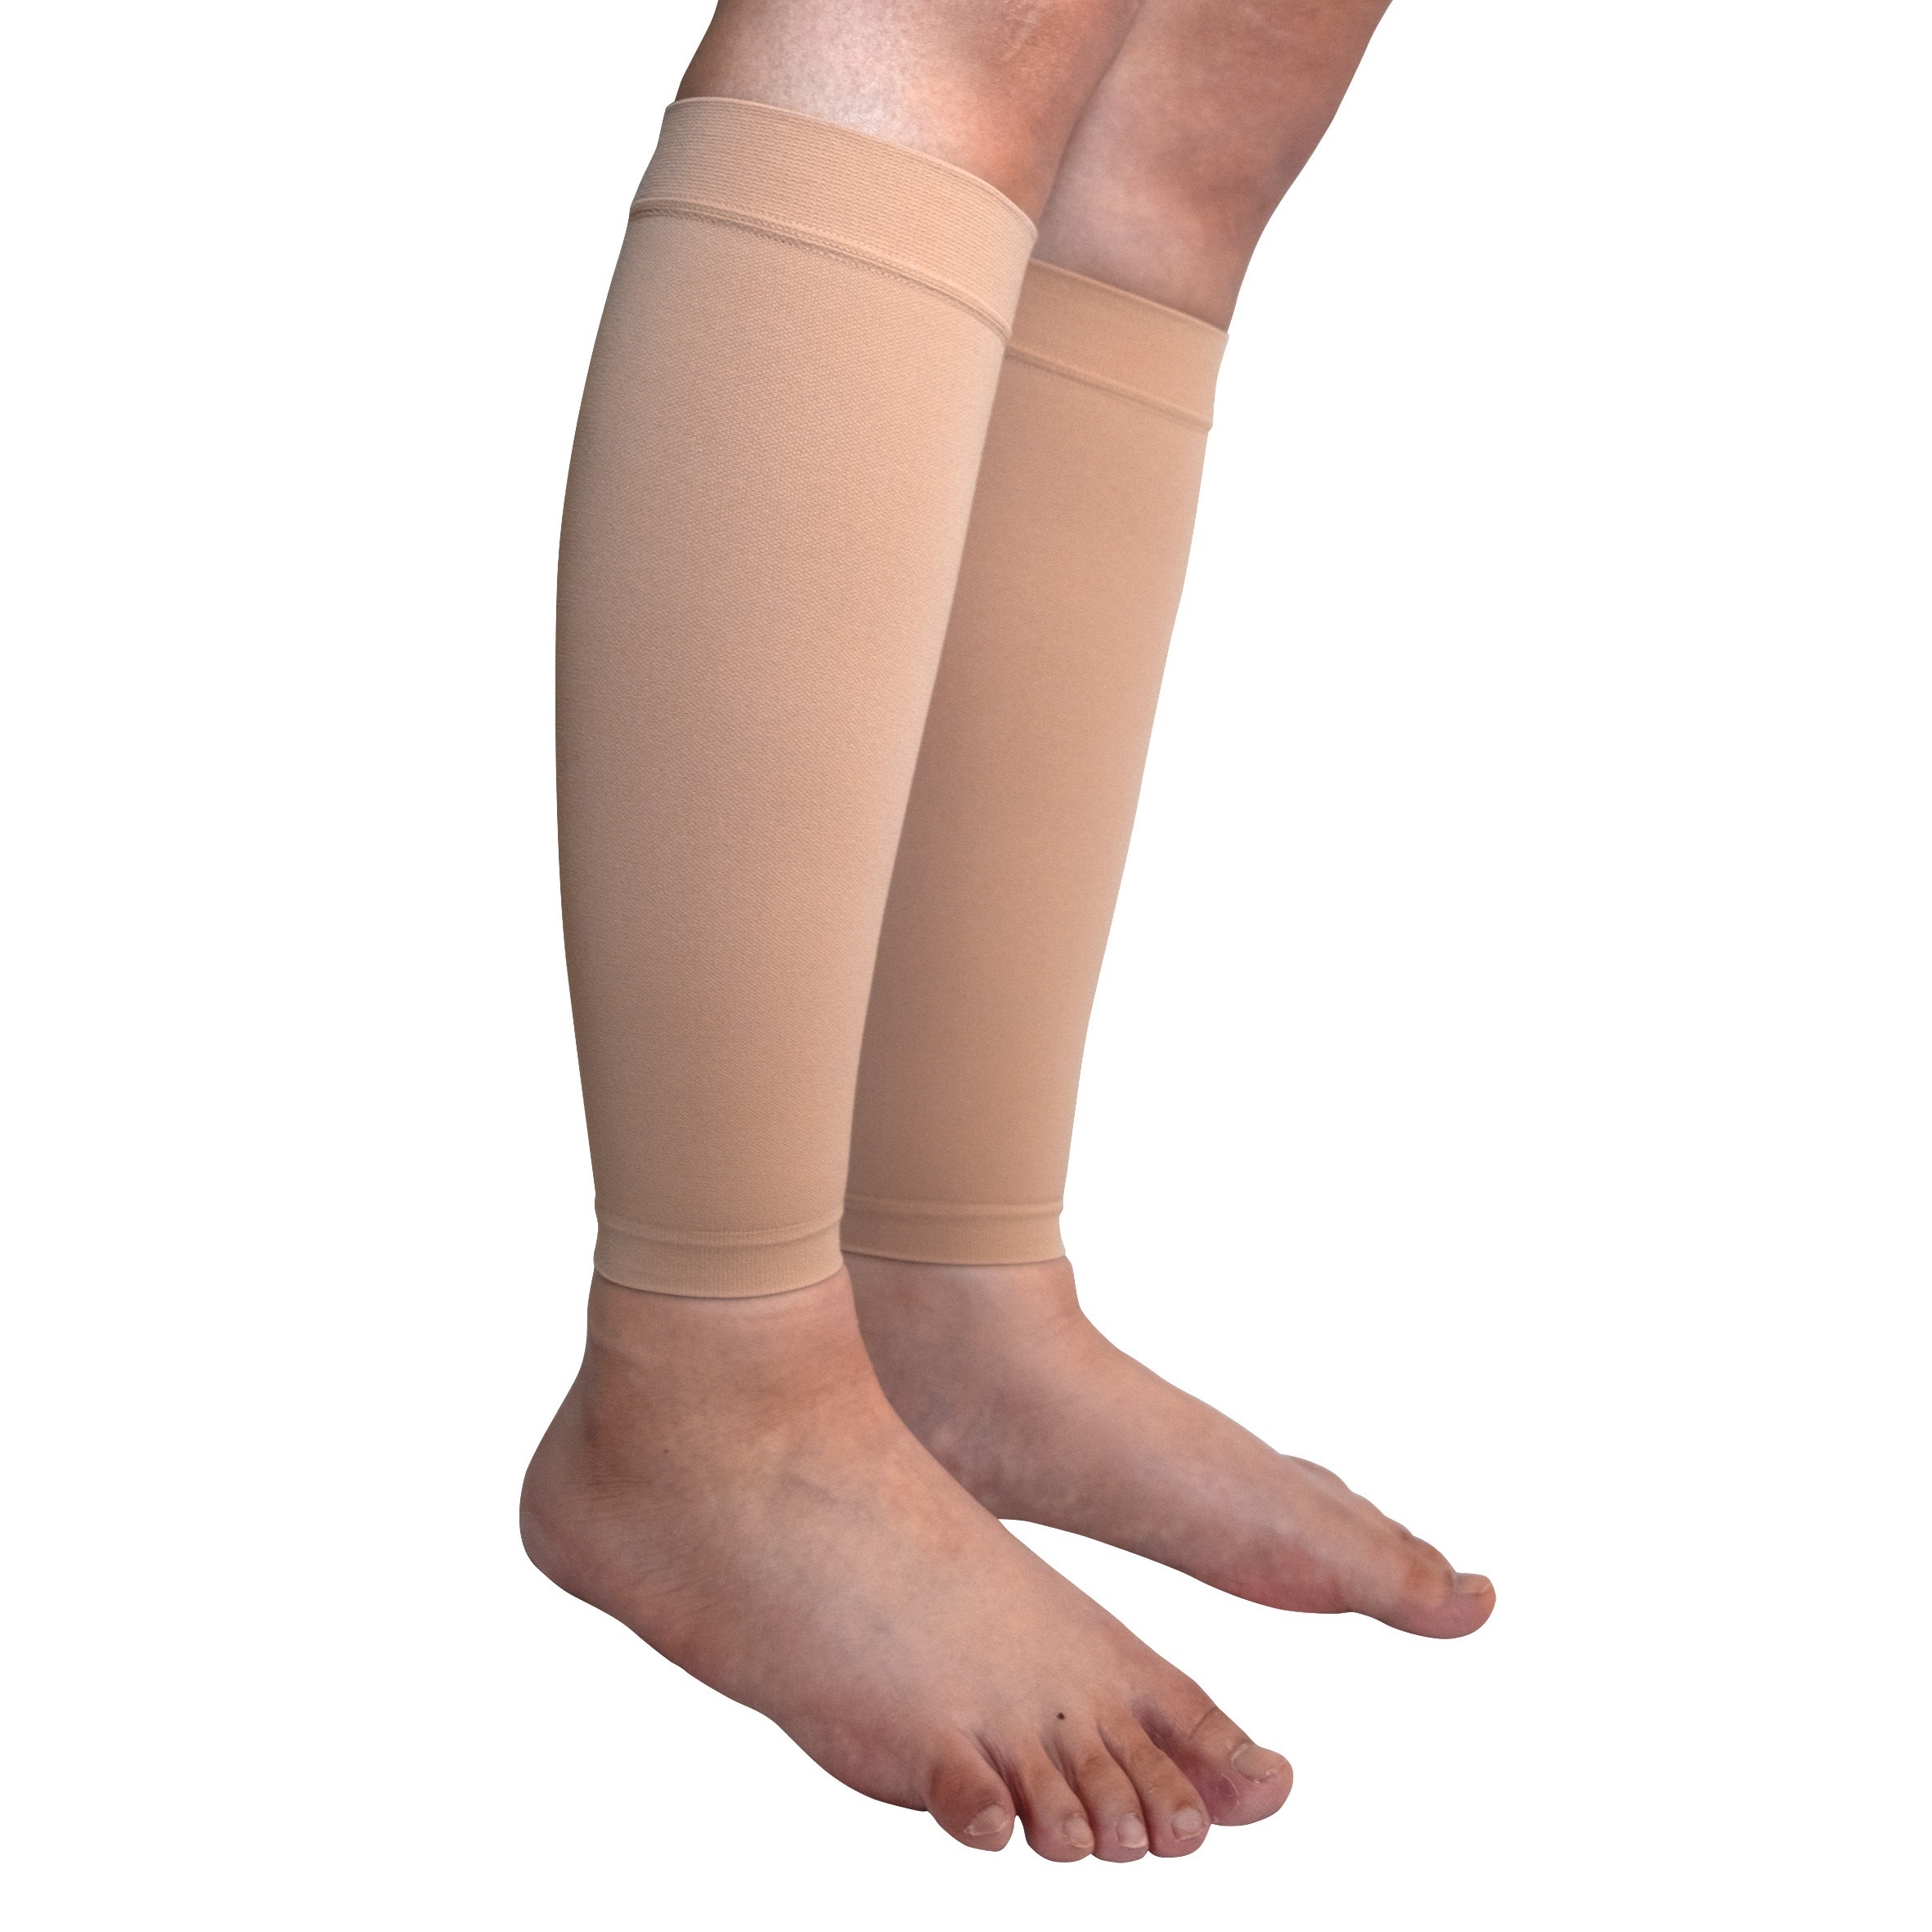 High Elastic Breathable Compression Stocking Men Women Pressure Nylon  Varicose Vein Stockings Travel Leg Relief Pain Support Outdoor Stockings 